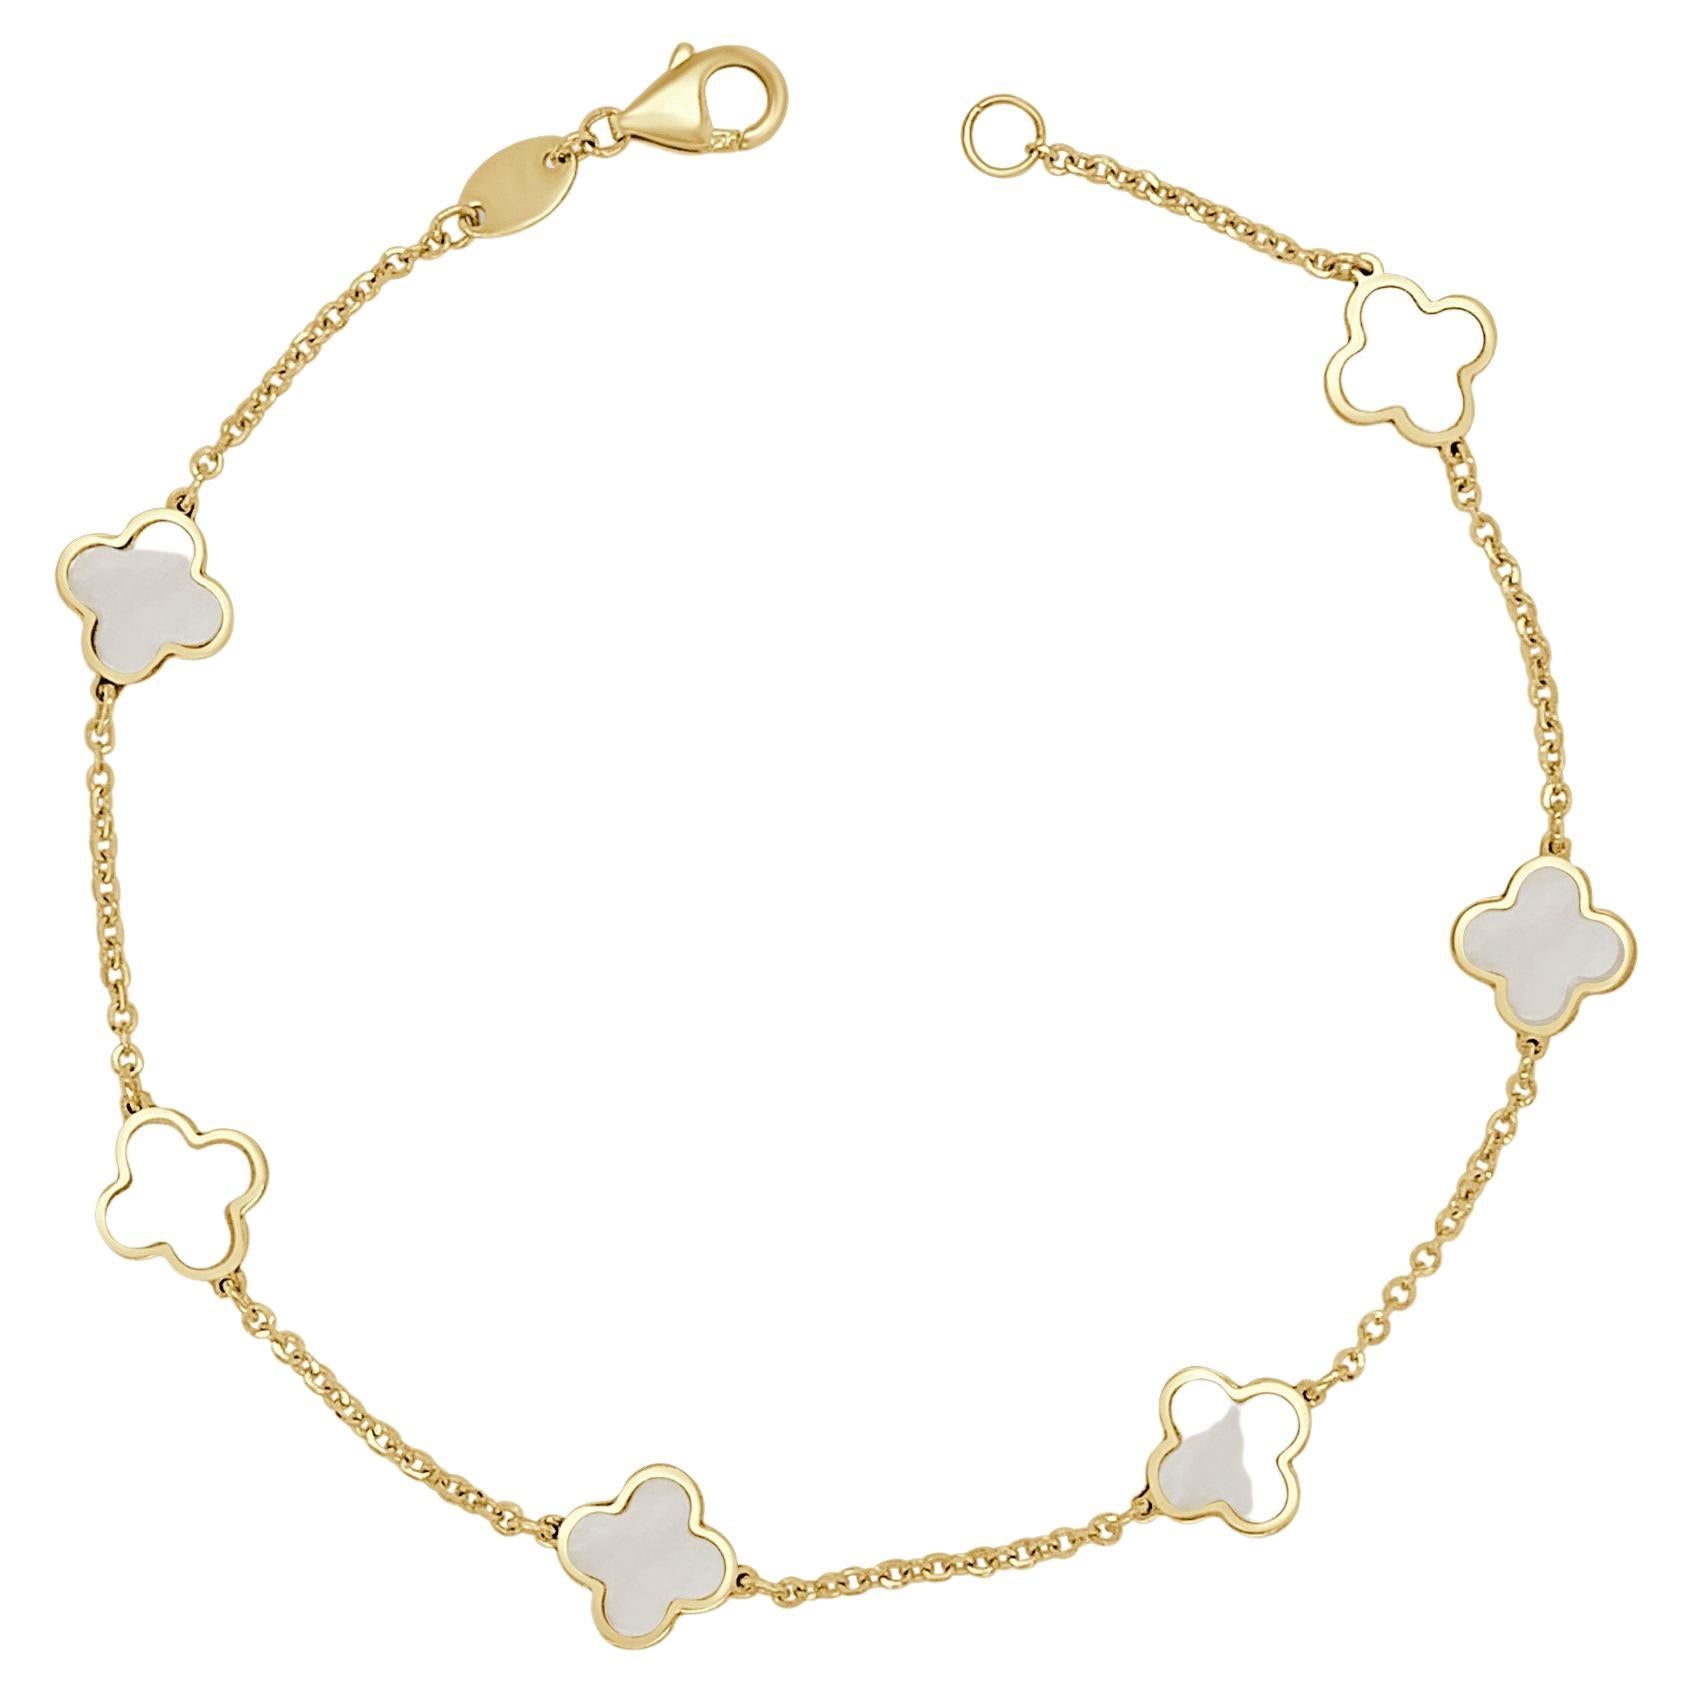 14K Yellow Gold Station Clover Bracelet in Mother of Pearl